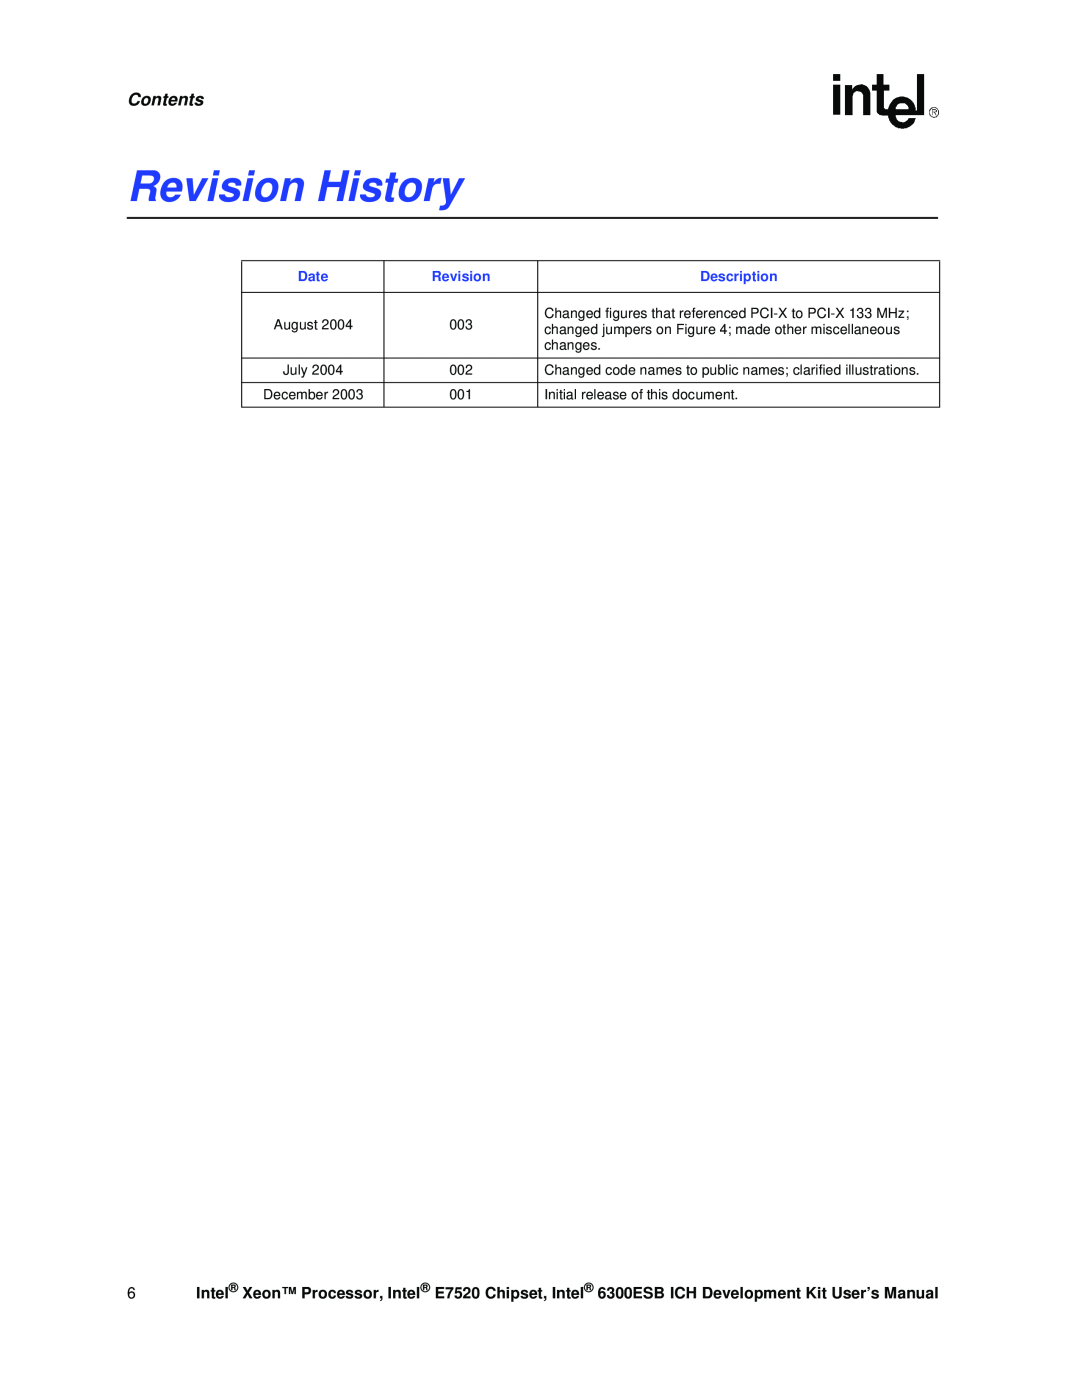 Intel Xeon, 6300ESB ICH user manual Revision History, Contents, Date, Description, August 